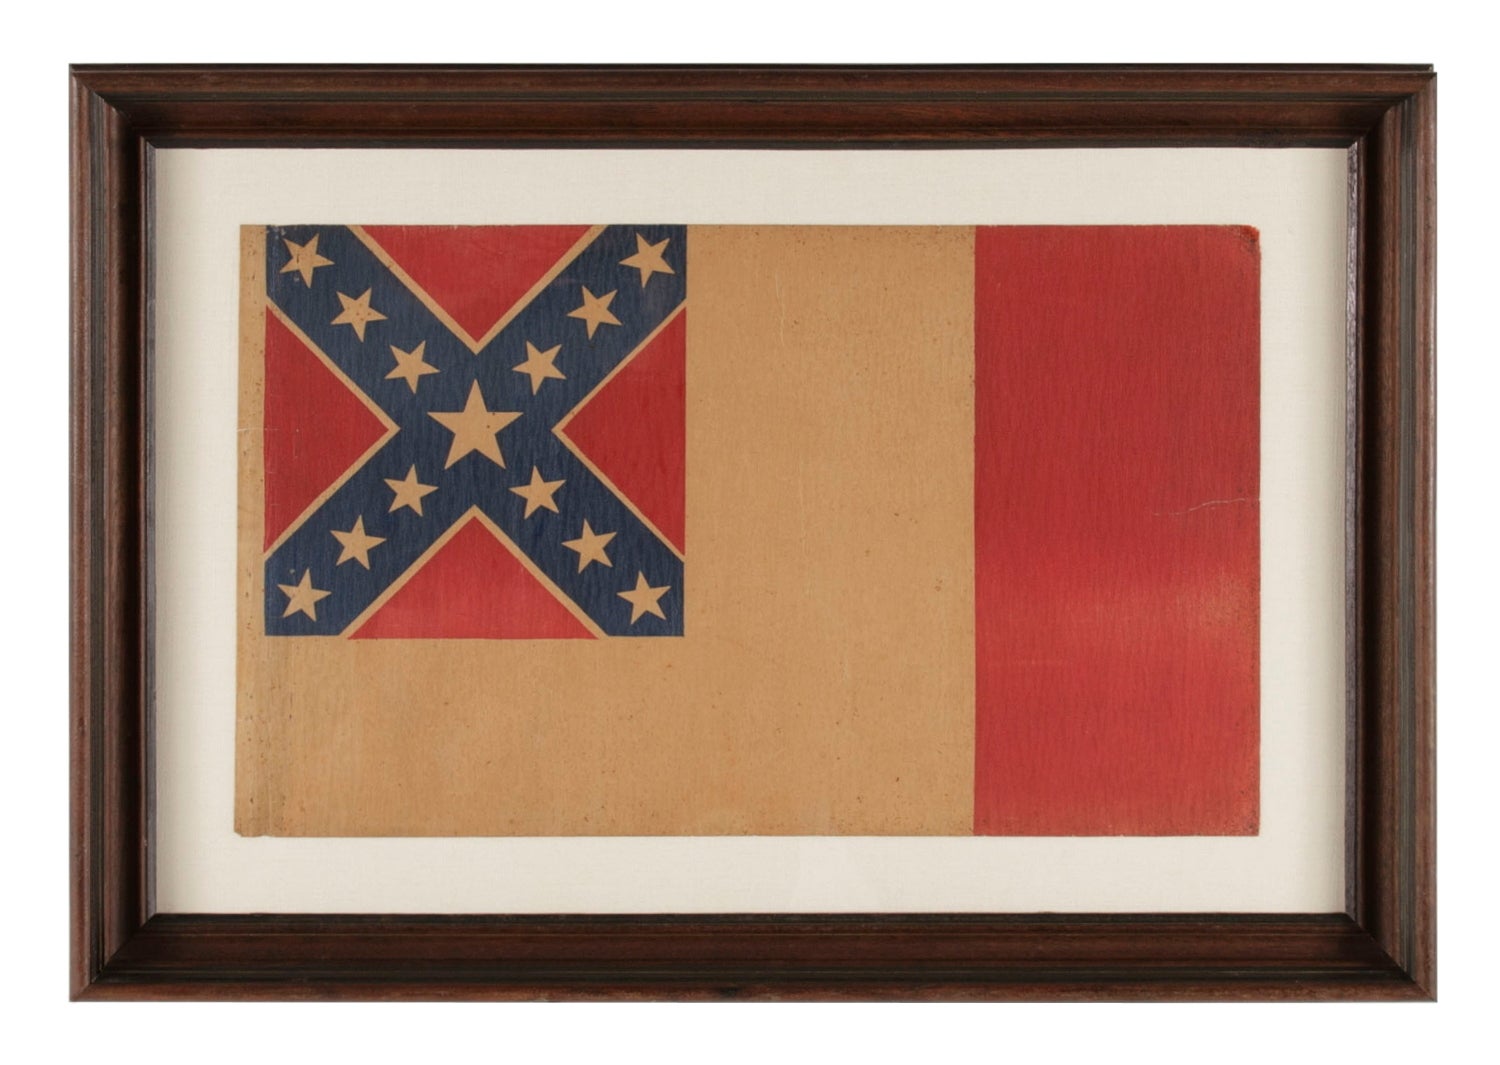 Unusual Confederate Flag in the 3rd National Format, Printed on Heavy Parchment, 1884-1910